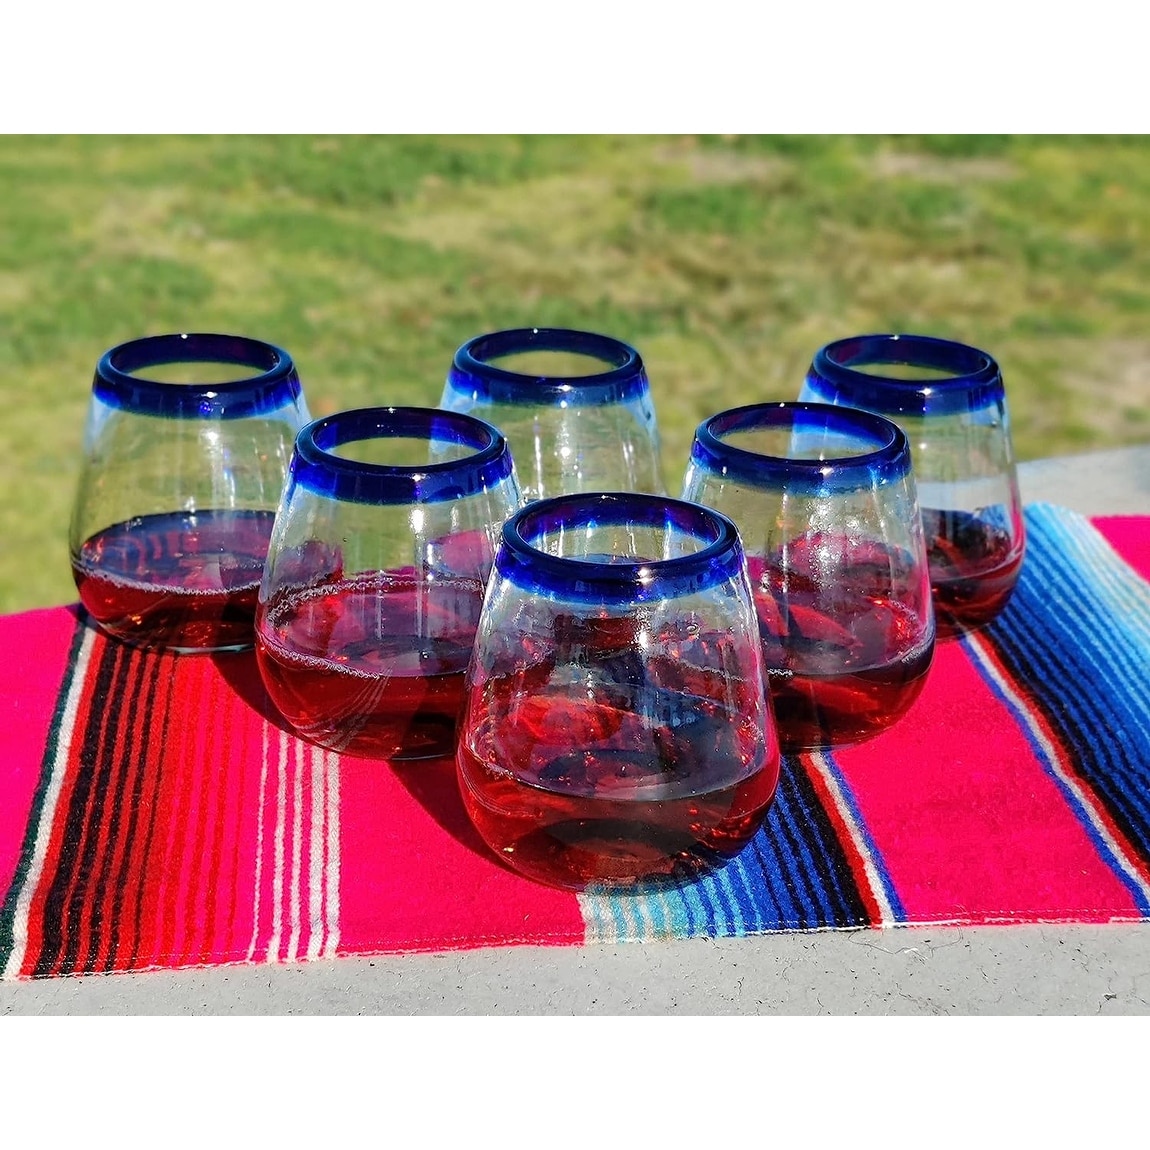 https://ak1.ostkcdn.com/images/products/is/images/direct/1fab48b1b1a0e27e03a96f71b6cc61e994485c42/Hand-Blown-Mexican-Stemless-Wine-Glasses---Set-of-6-Glasses-with-Cobalt-Blue-Rims-%2815-oz%29.jpg